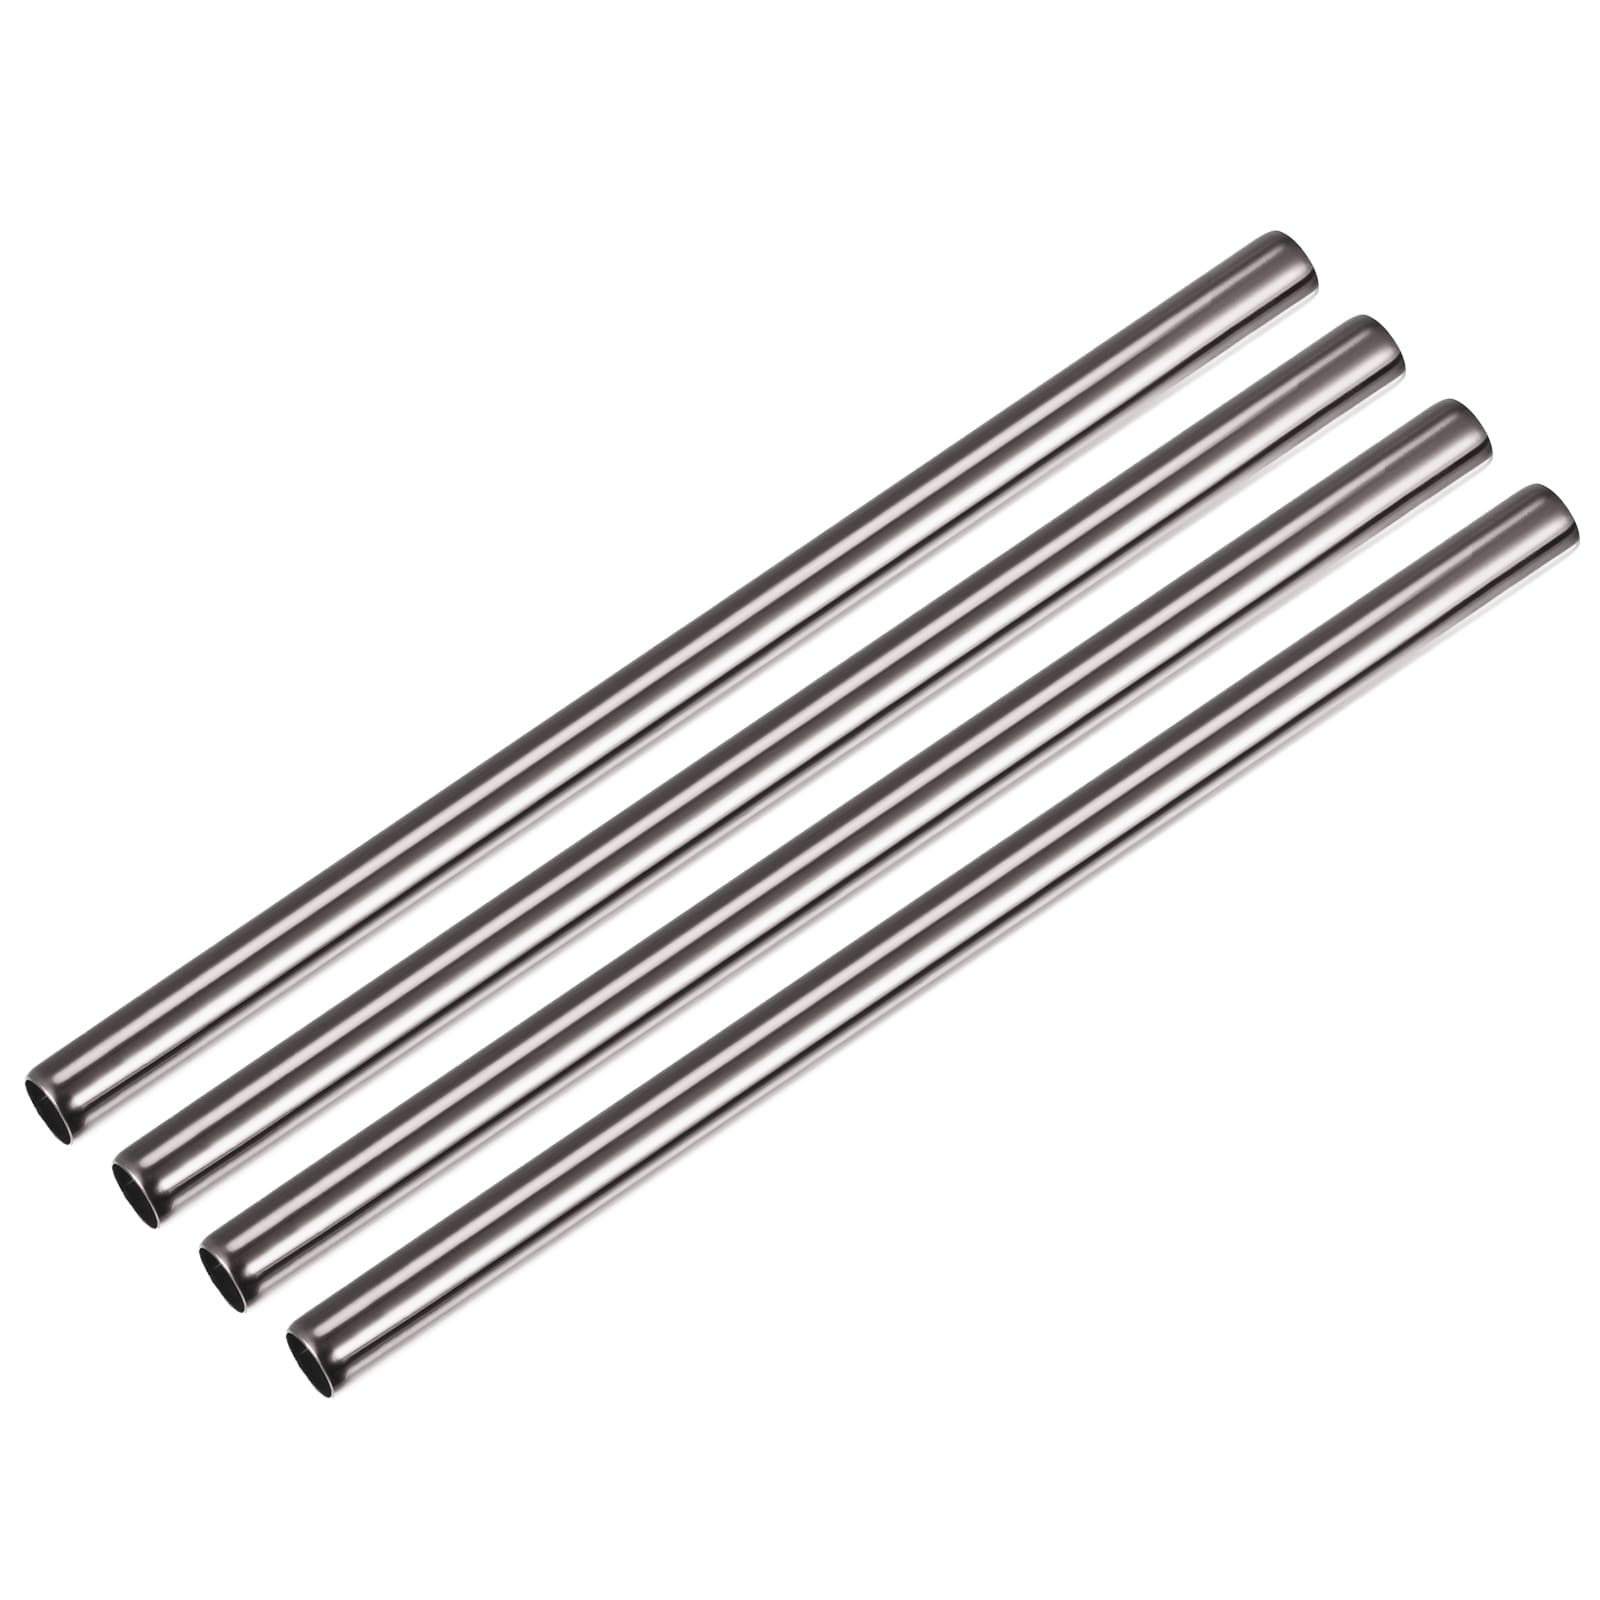 https://ak1.ostkcdn.com/images/products/is/images/direct/09824a50a7df20403cade8a8d831283c9a1b8407/Reusable-Metal-Straws-4Pcs%2C-Stainless-Steel-Straight-Drinking-Straw.jpg